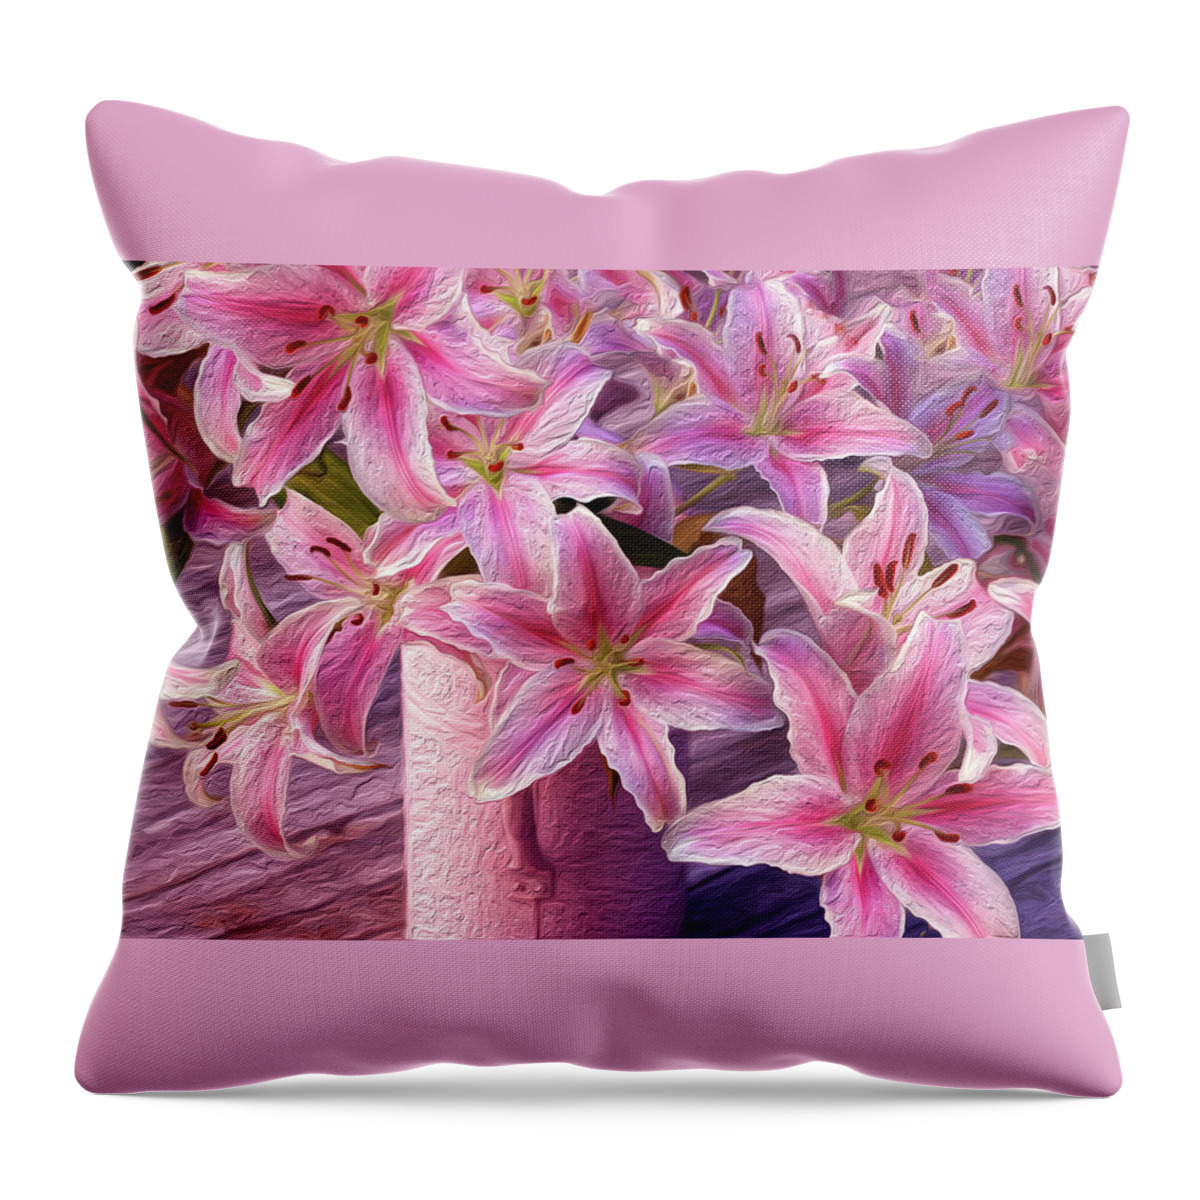 Lilies Throw Pillow featuring the photograph Painted Pink Lilies by Vanessa Thomas